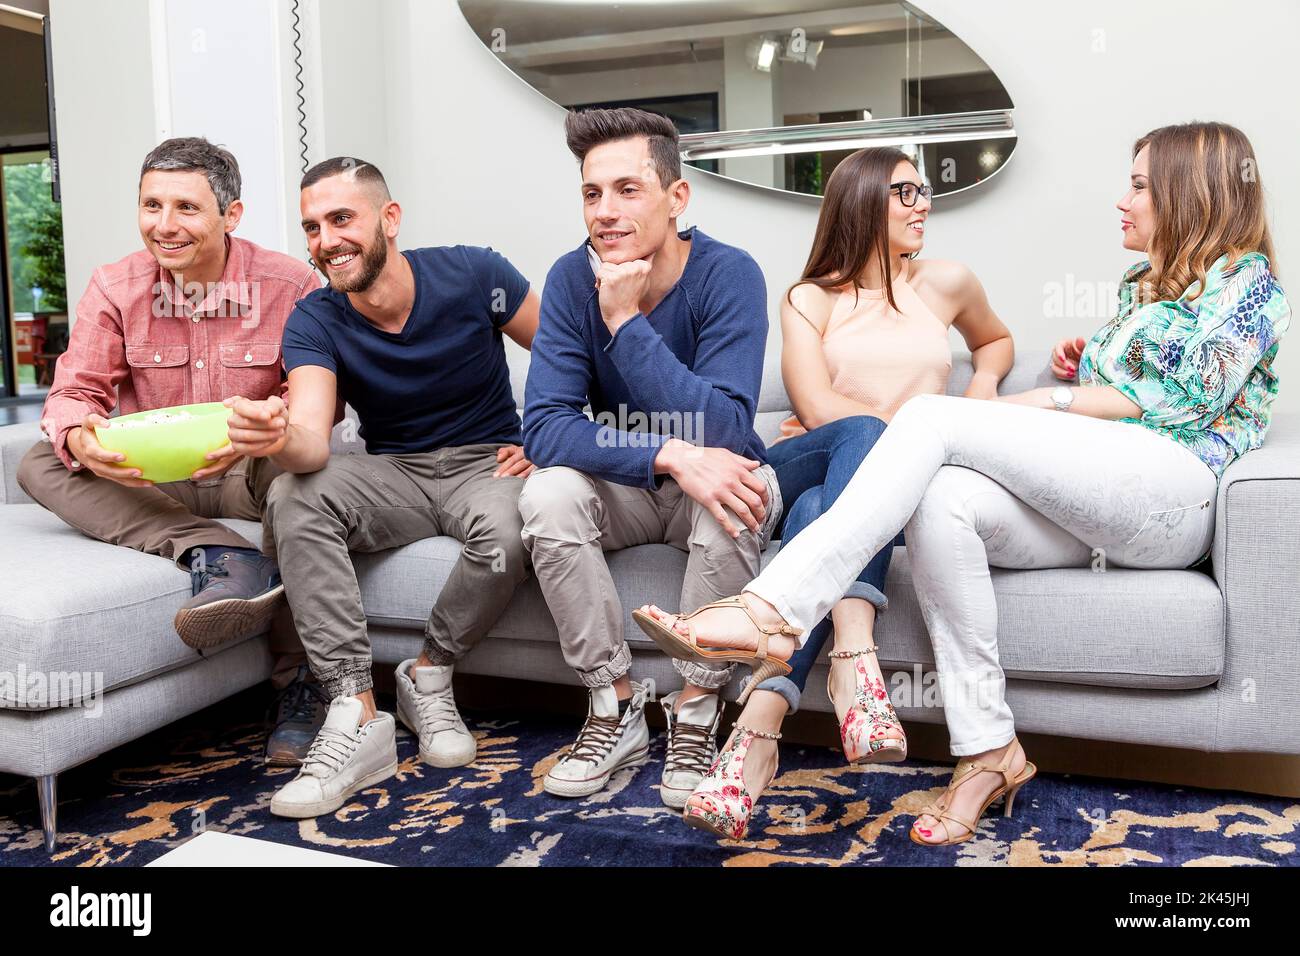 group of friends watching tv and eating popcorn on sofa Stock Photo